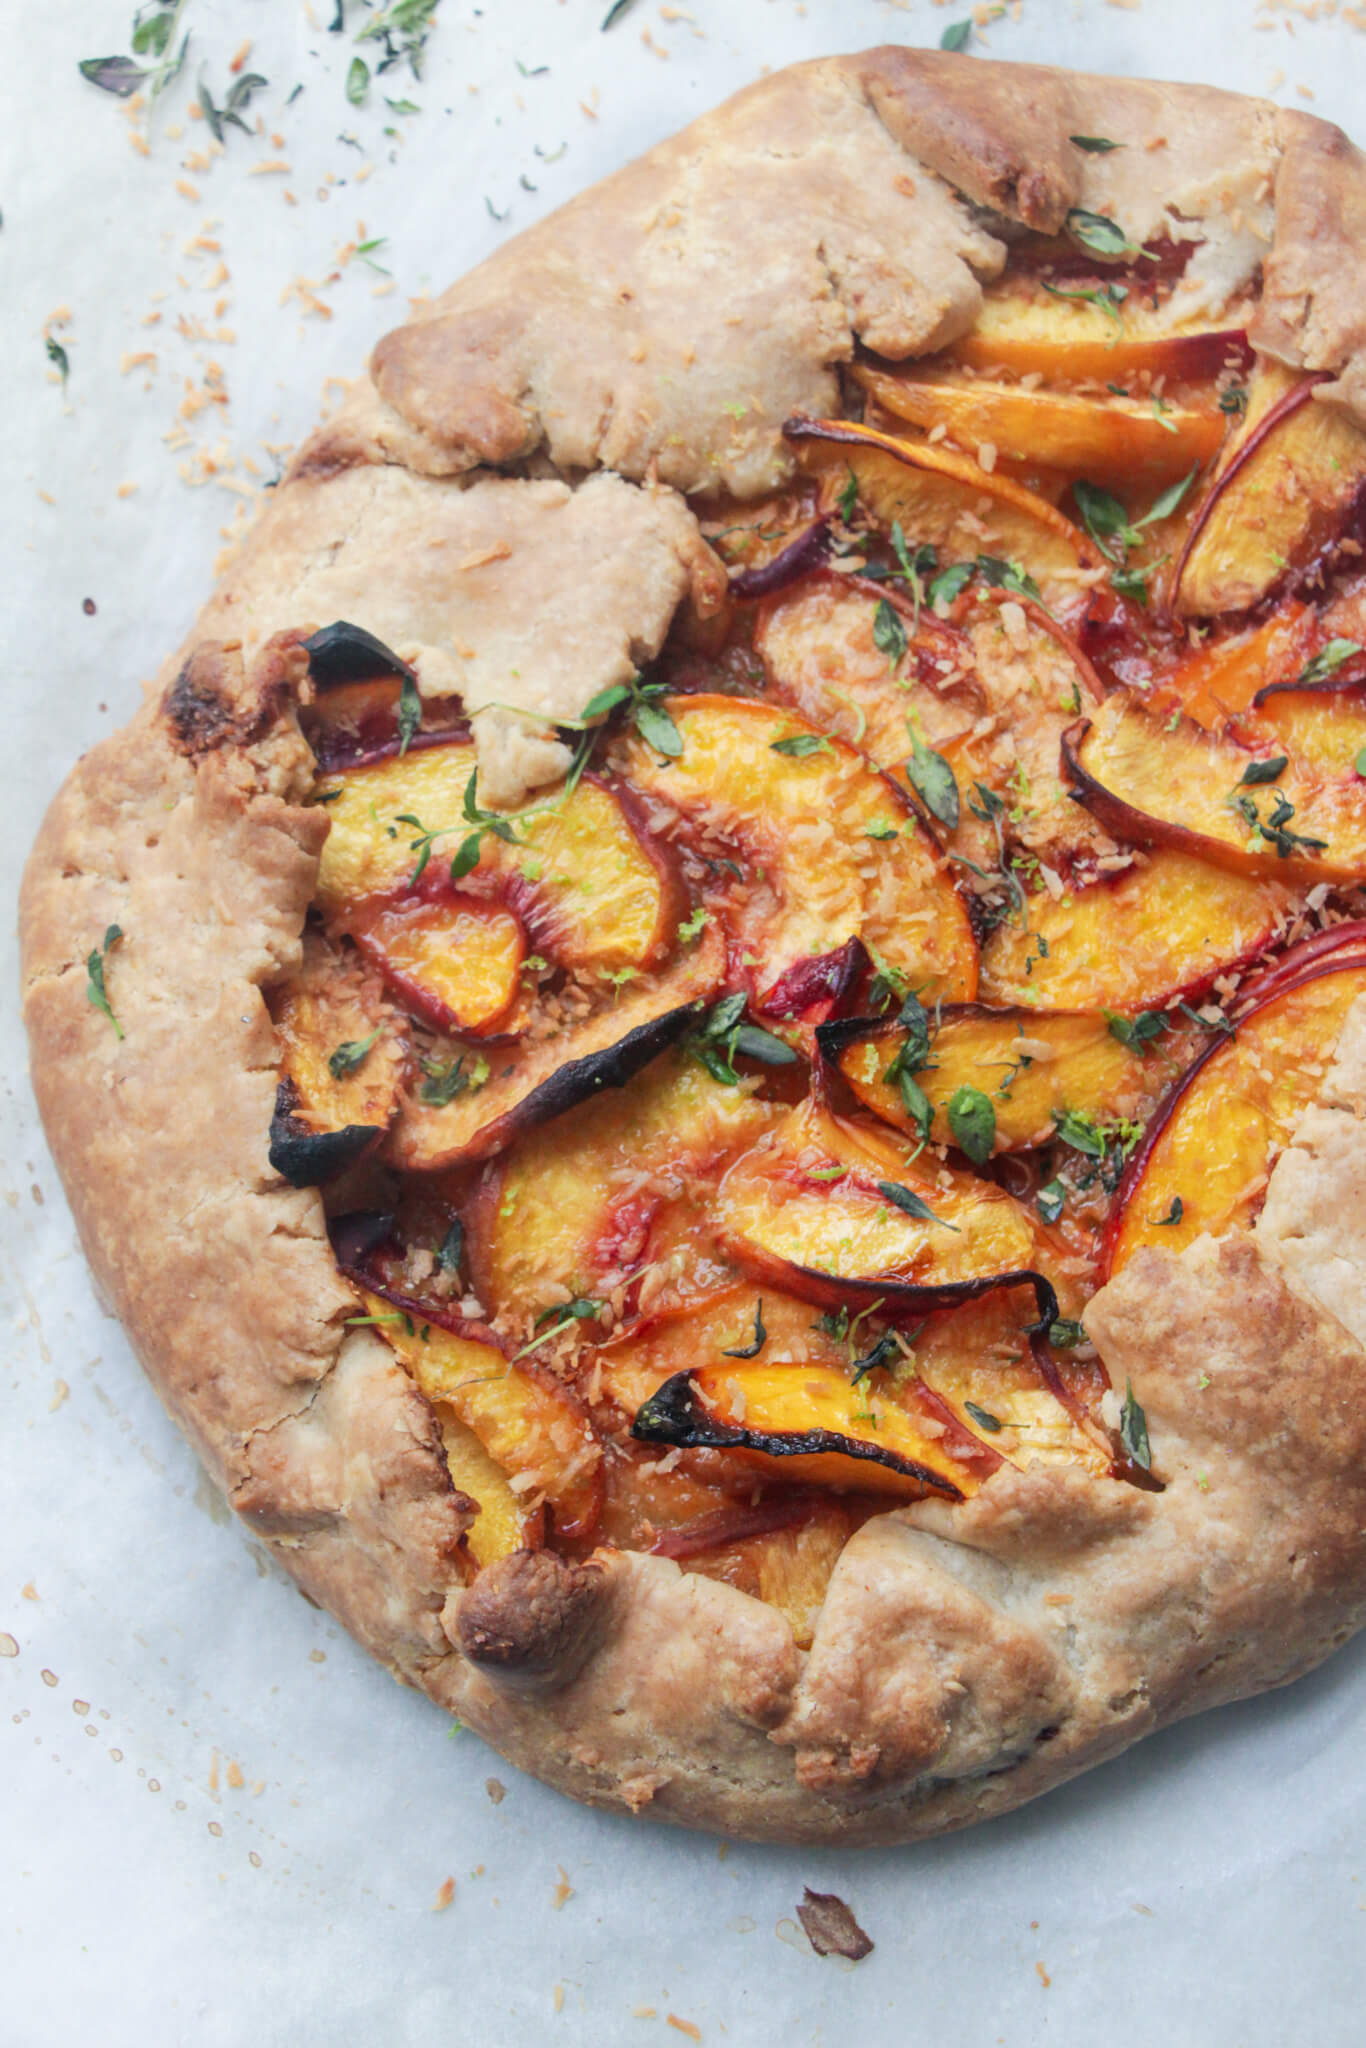 Peach almond galette with thyme leaves close up on a piece of baking paper.